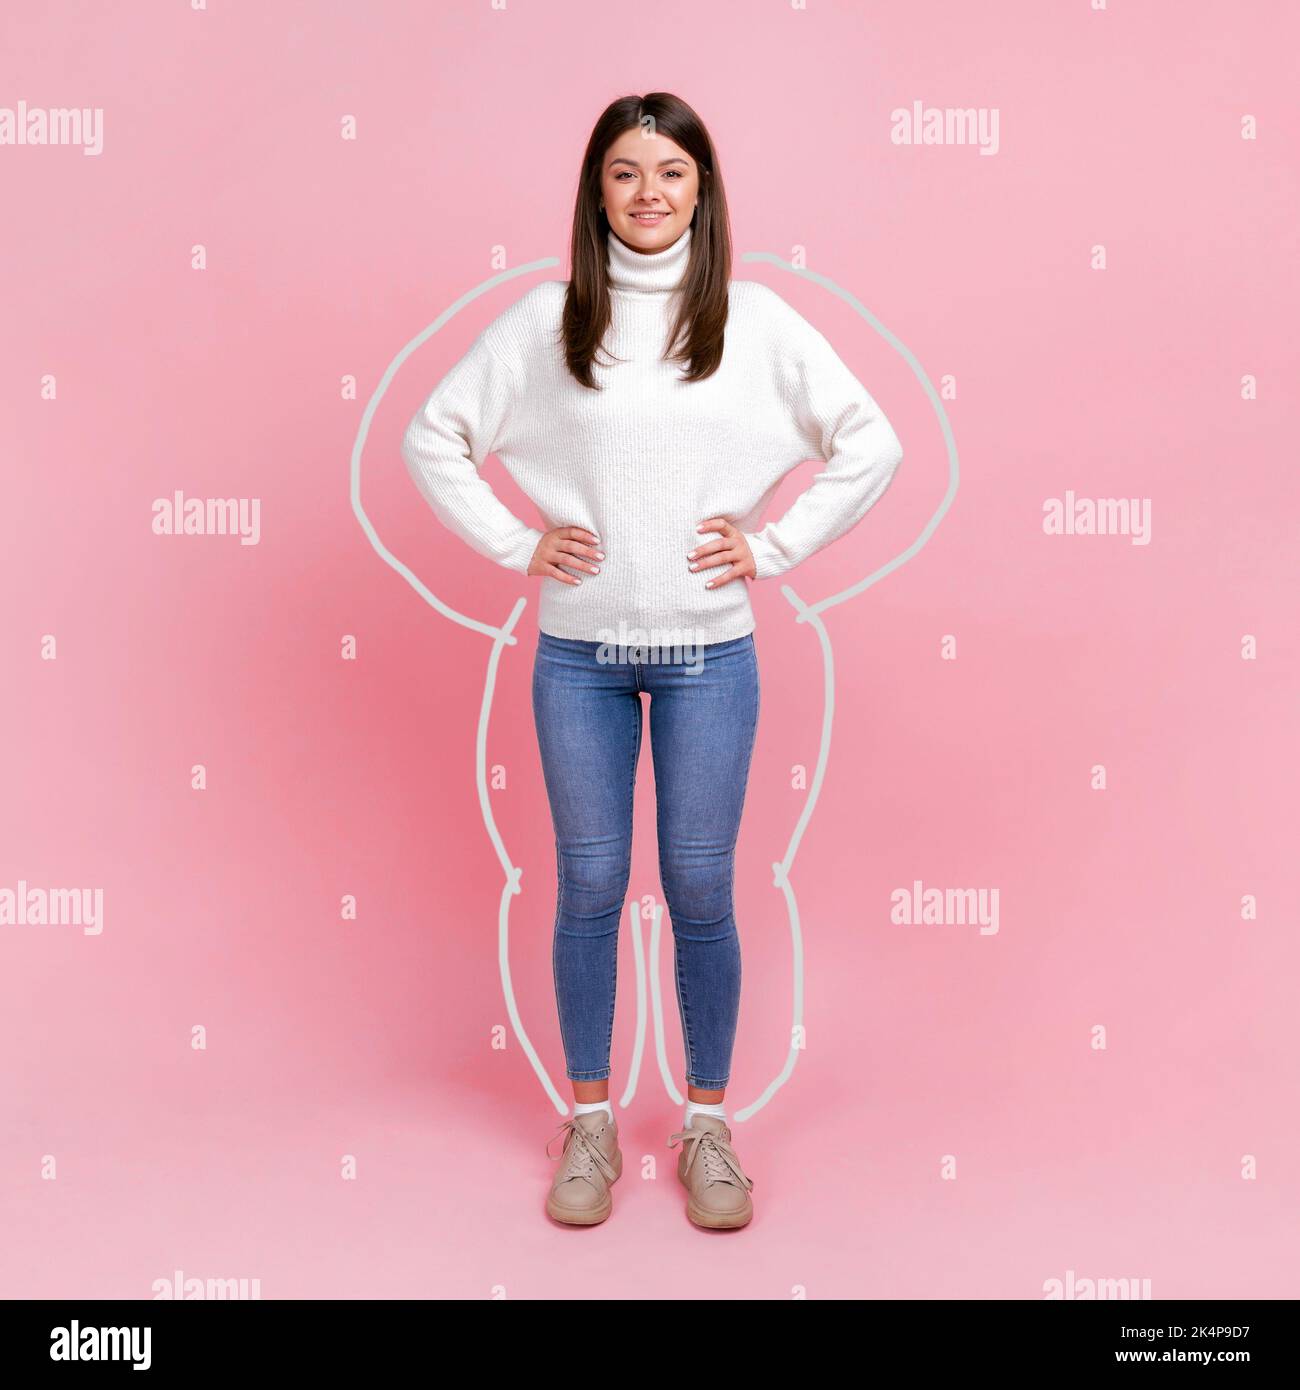 Body care, slimming and workout. Full length portrait of woman drown around, enjoying result of weight loss, standing with hands on hips. Indoor studio shot isolated on pink background. Stock Photo